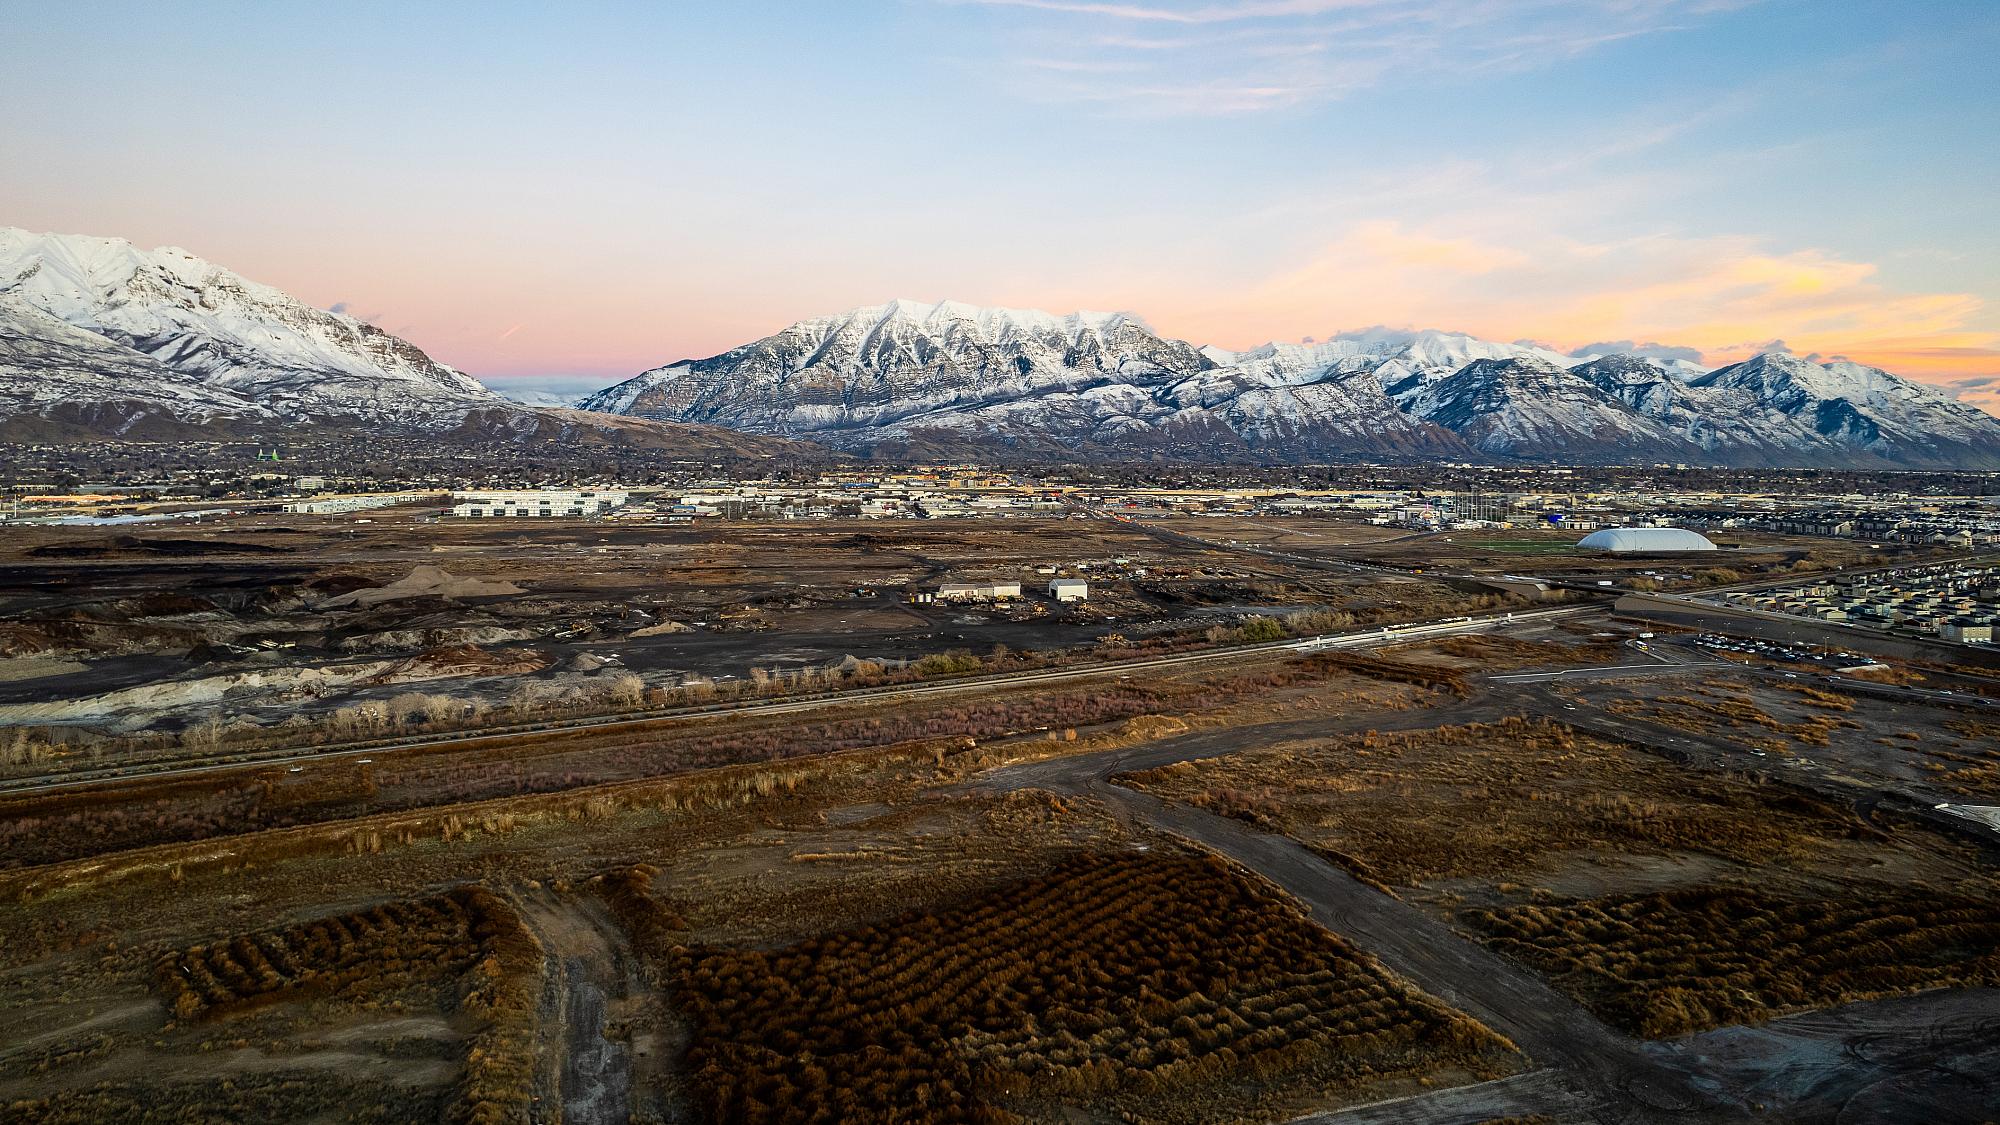 Aerial view of site where Huntsman Cancer Institute's Vineyard campus will be built; there are large empty fields stretching towards distant buildings and Mount Timpanogos in the background